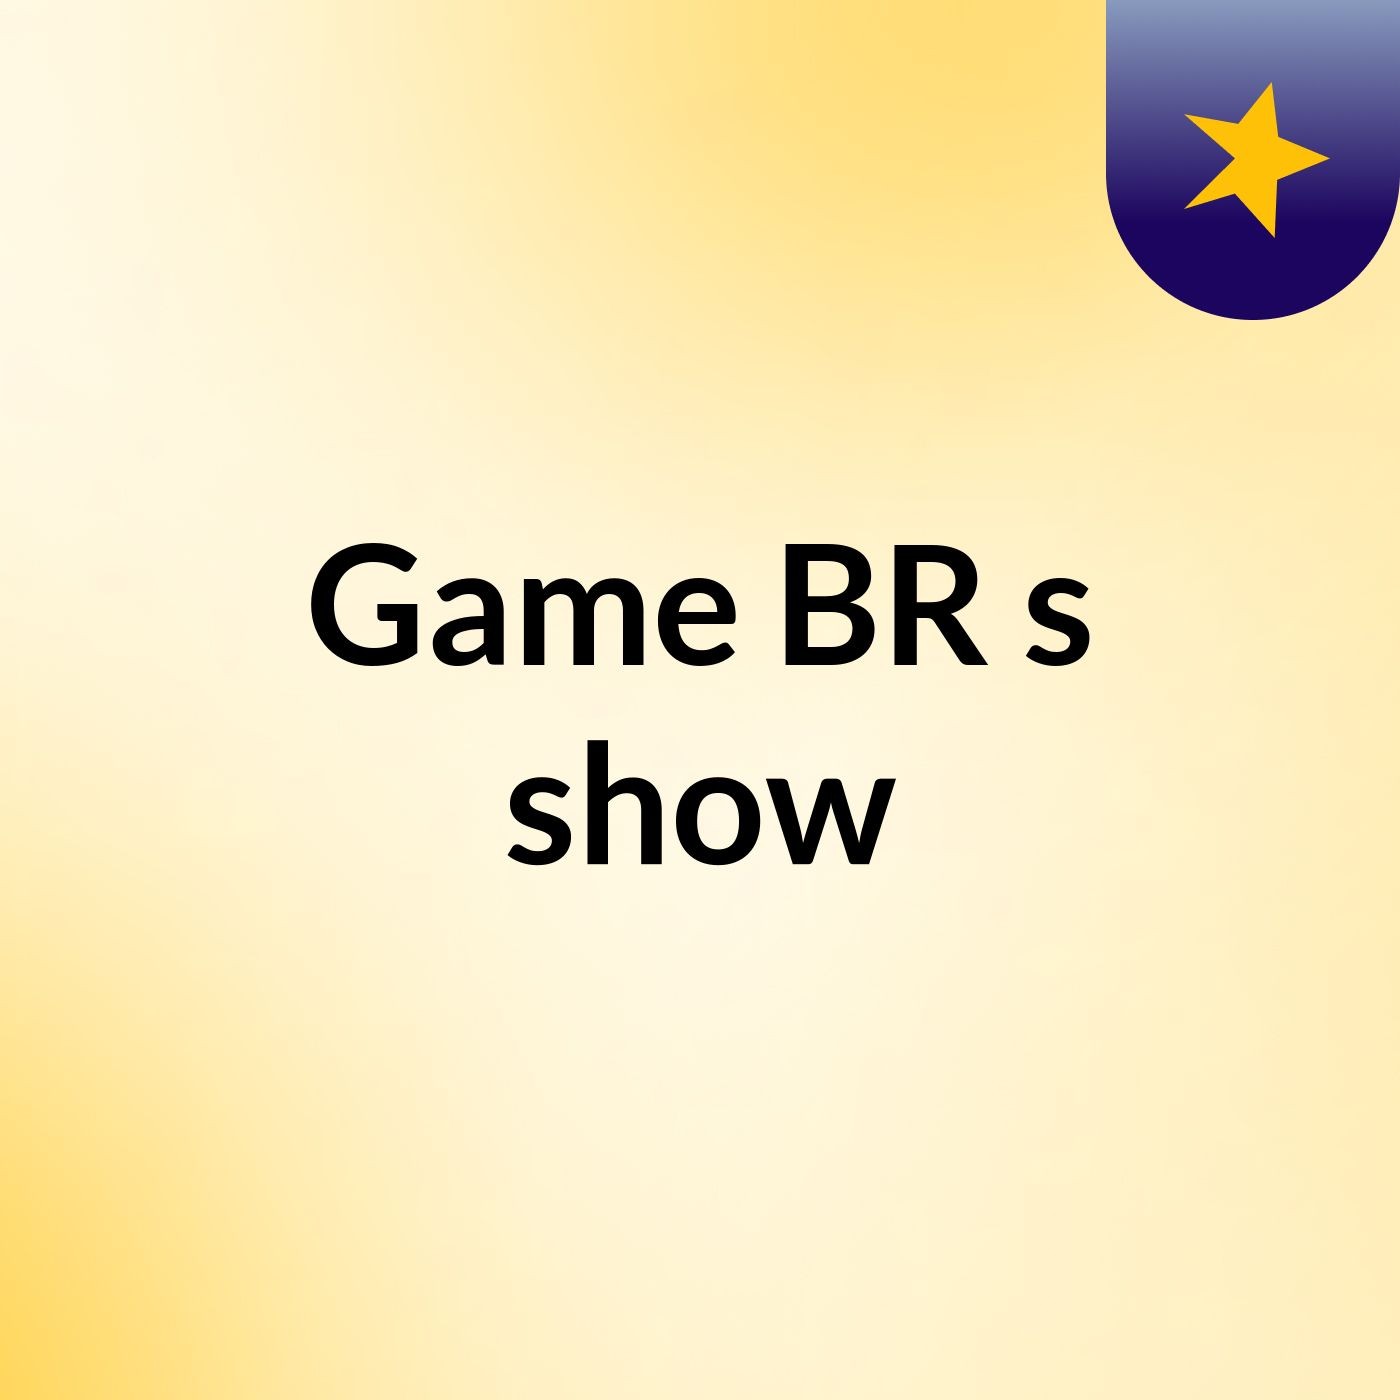 Game BR's show